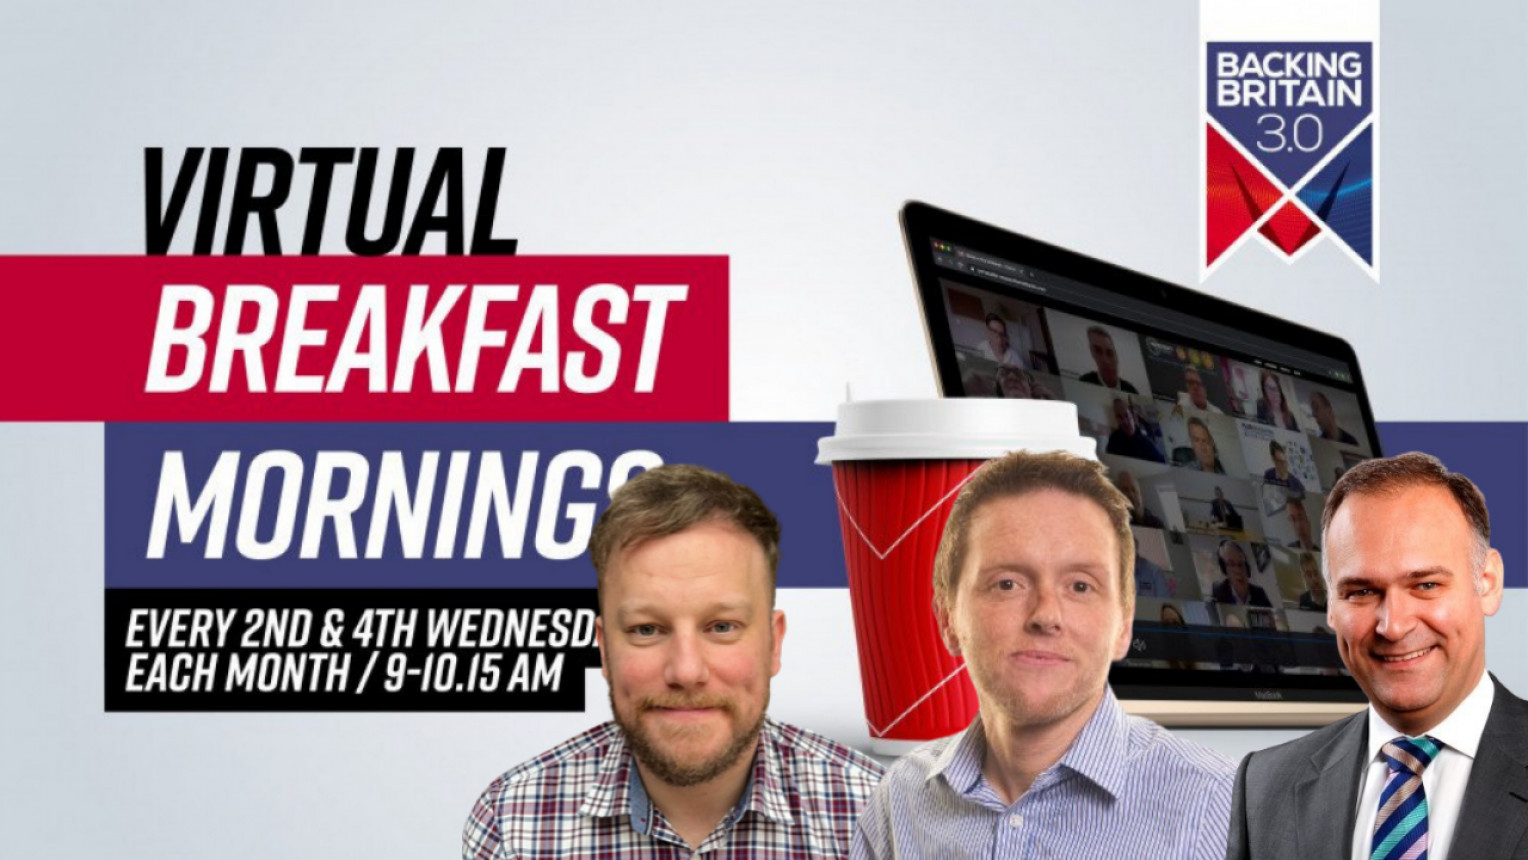 Backing Britain Virtual Breakfast Morning with APS UK and Ansaldo Nuclear and Quantamatic